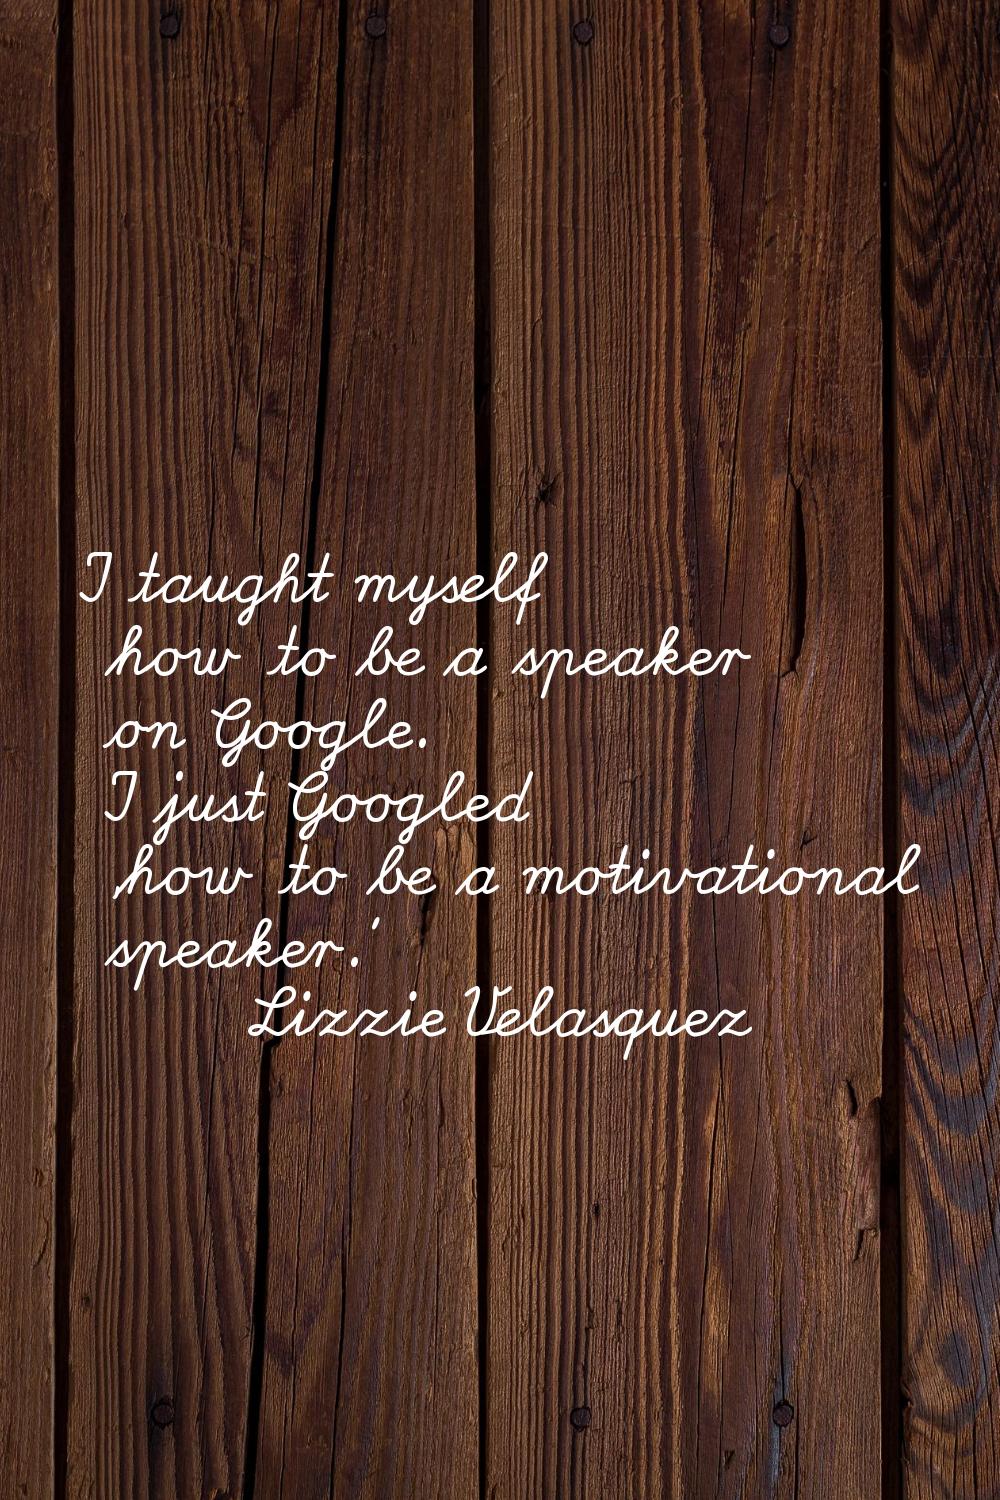 I taught myself how to be a speaker on Google. I just Googled 'how to be a motivational speaker.'